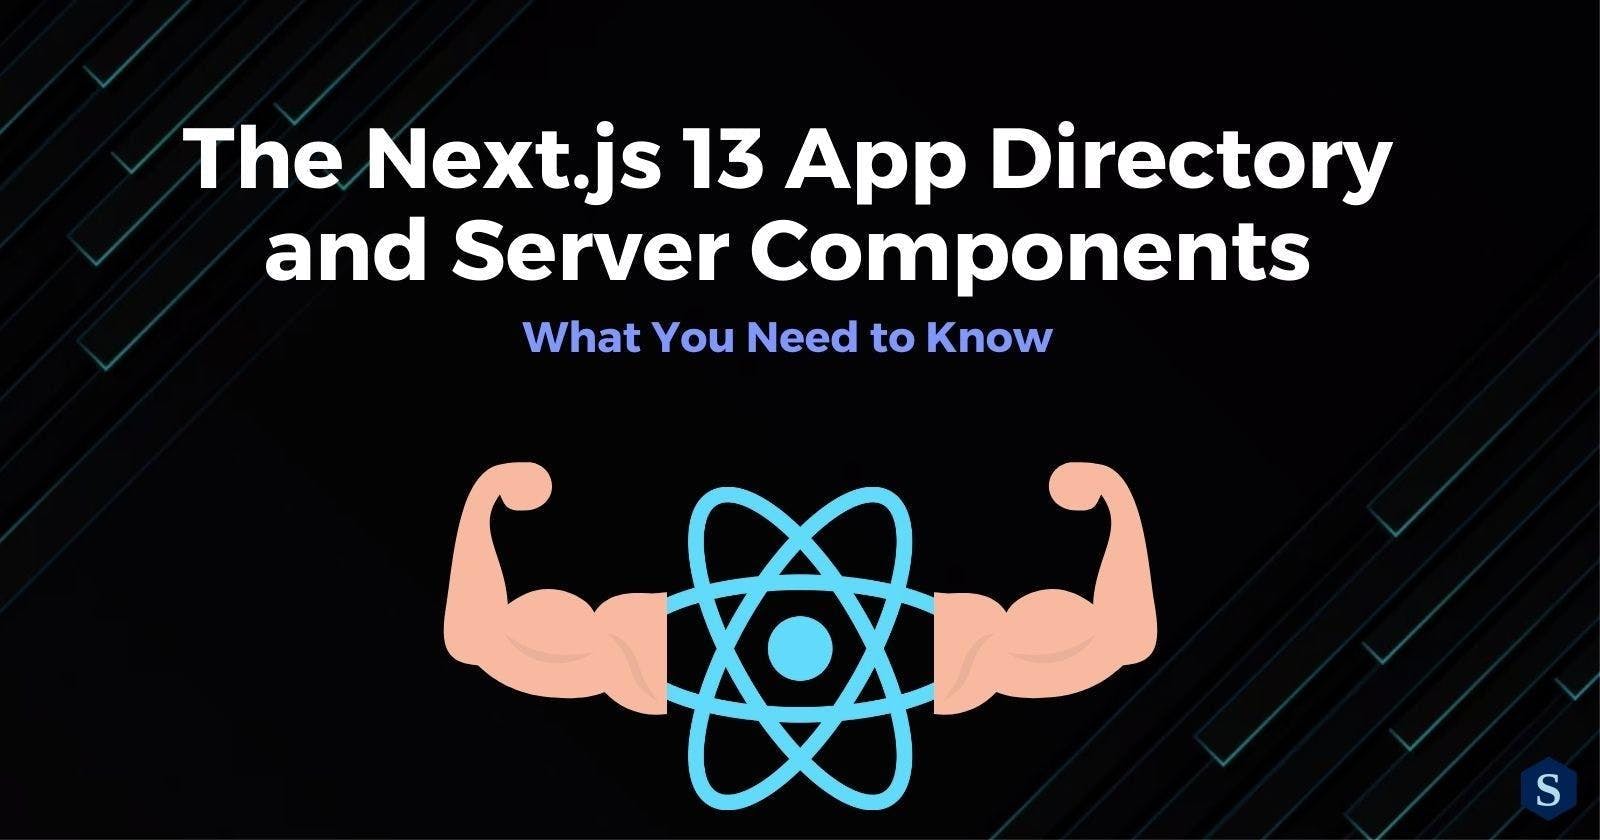 The Next.js App Directory and Server Components Explained